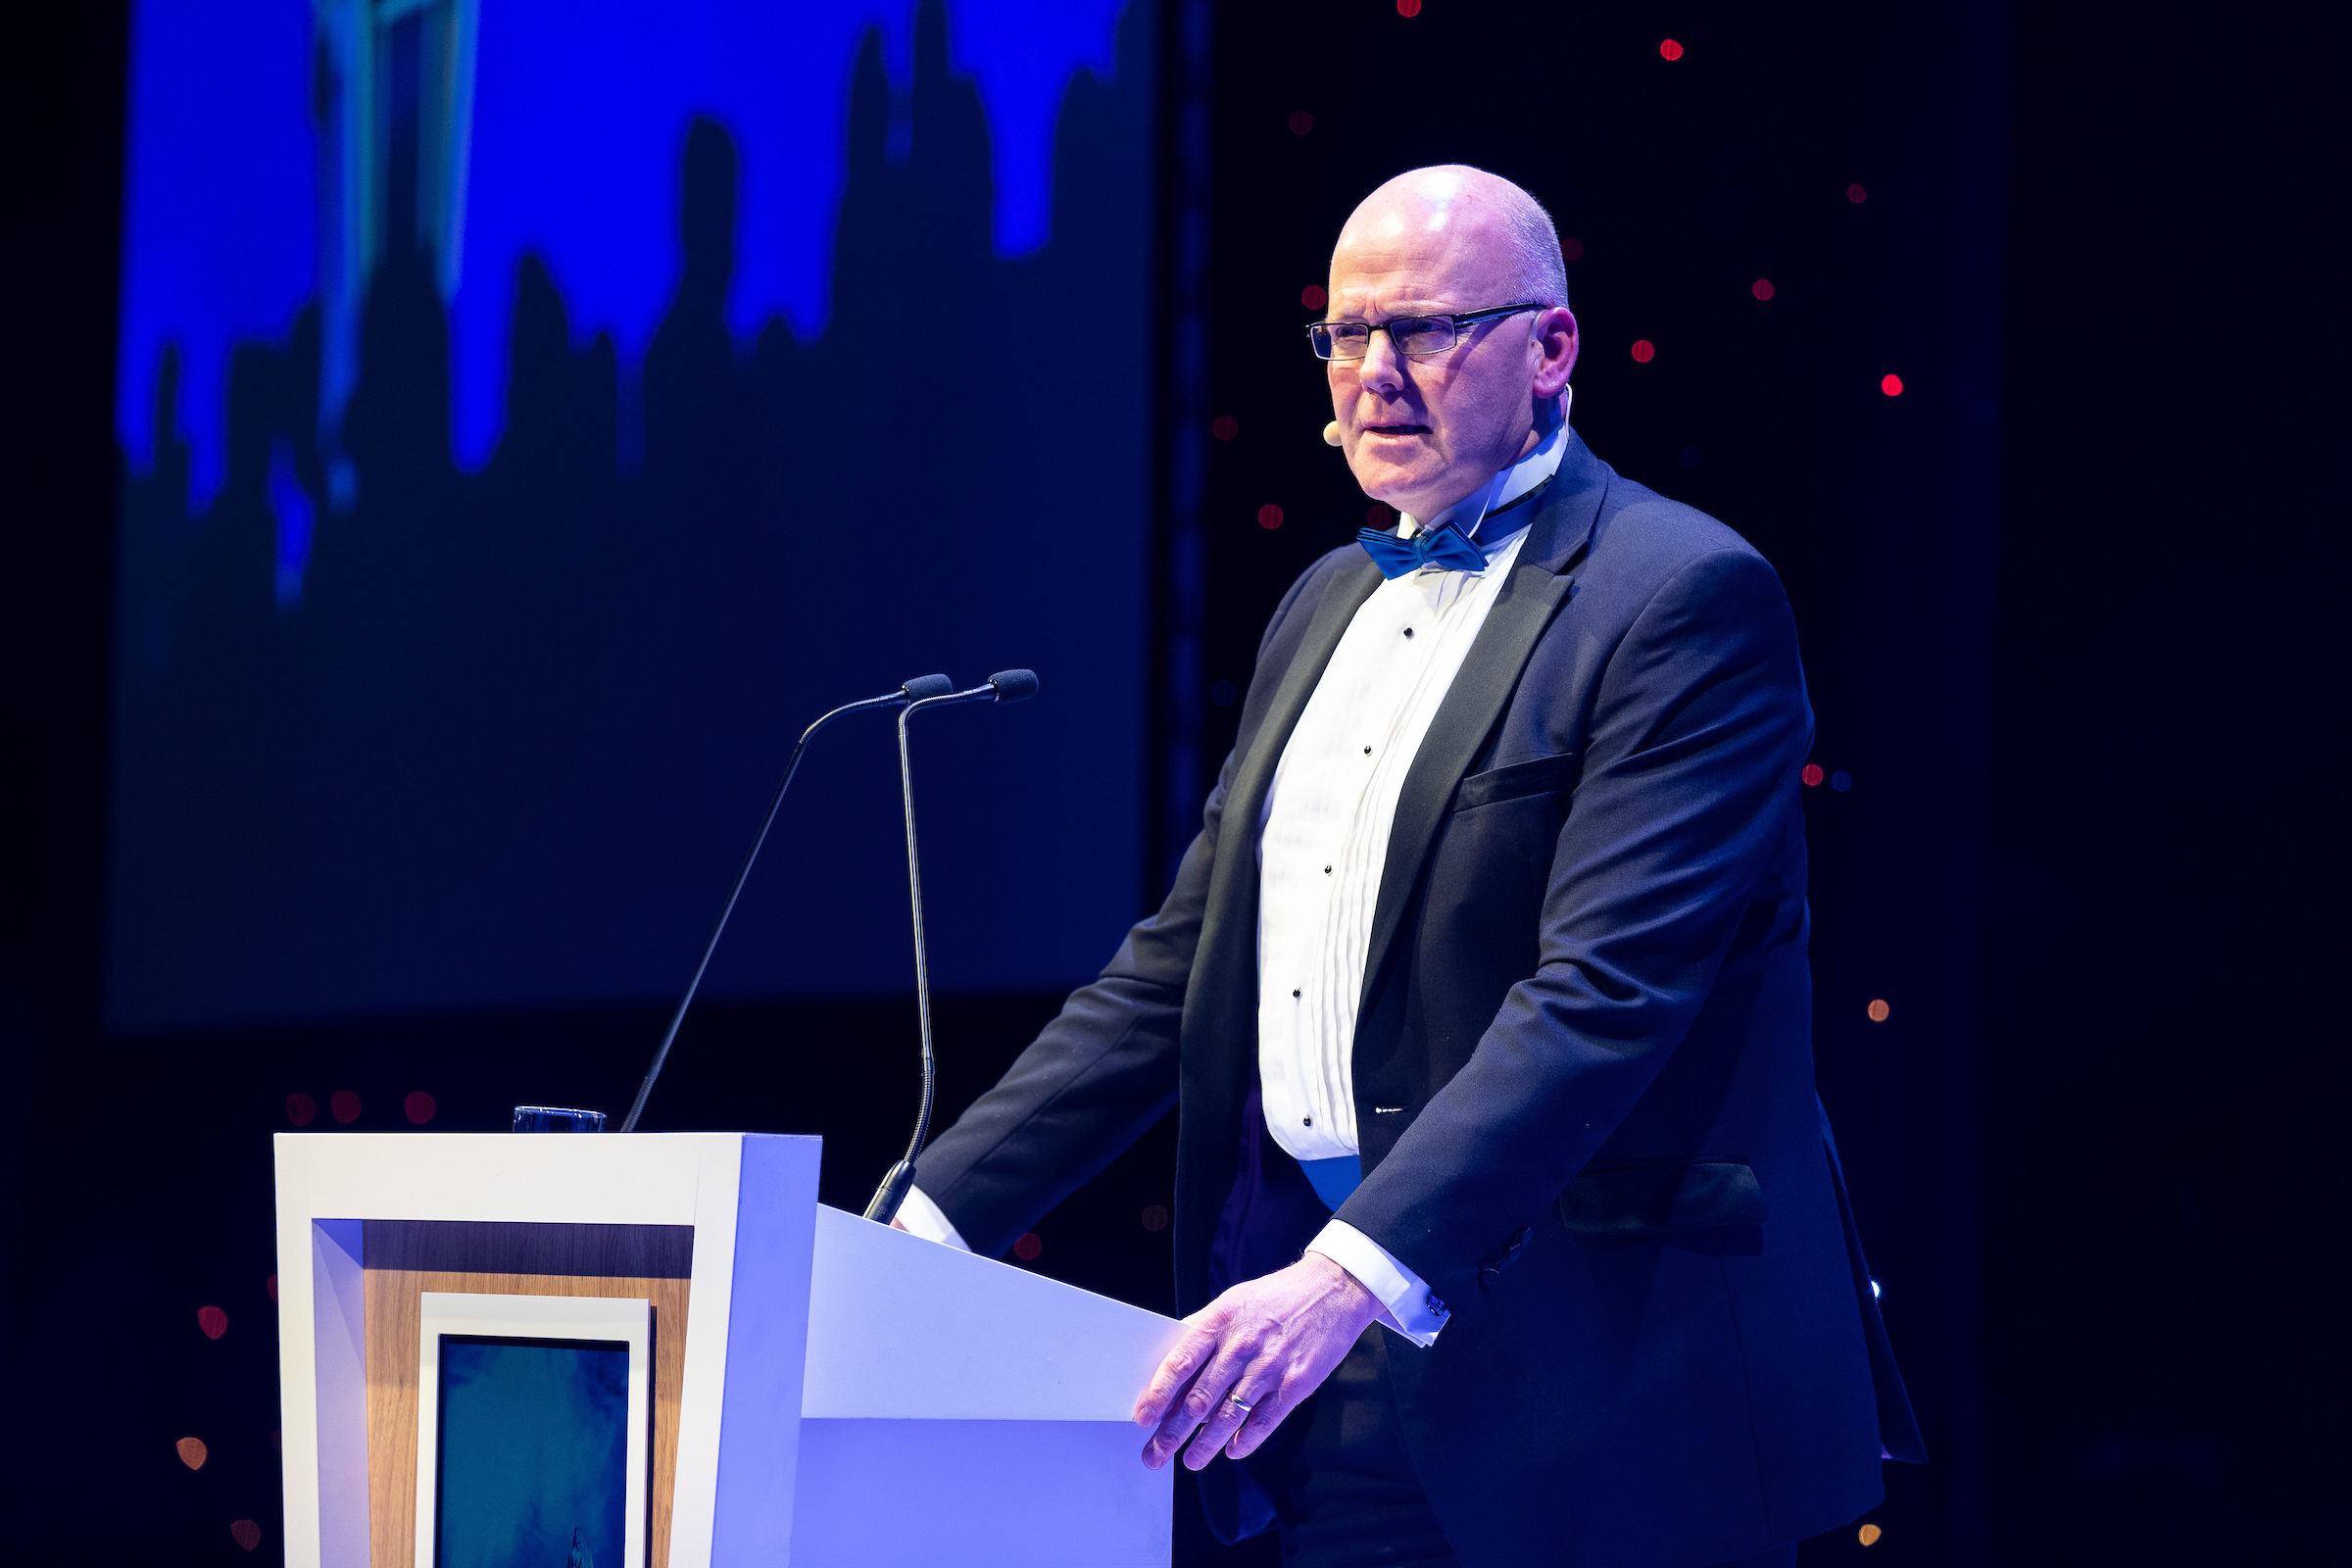 MEMBER NEWS: Finalists announced for Subsea Expo awards